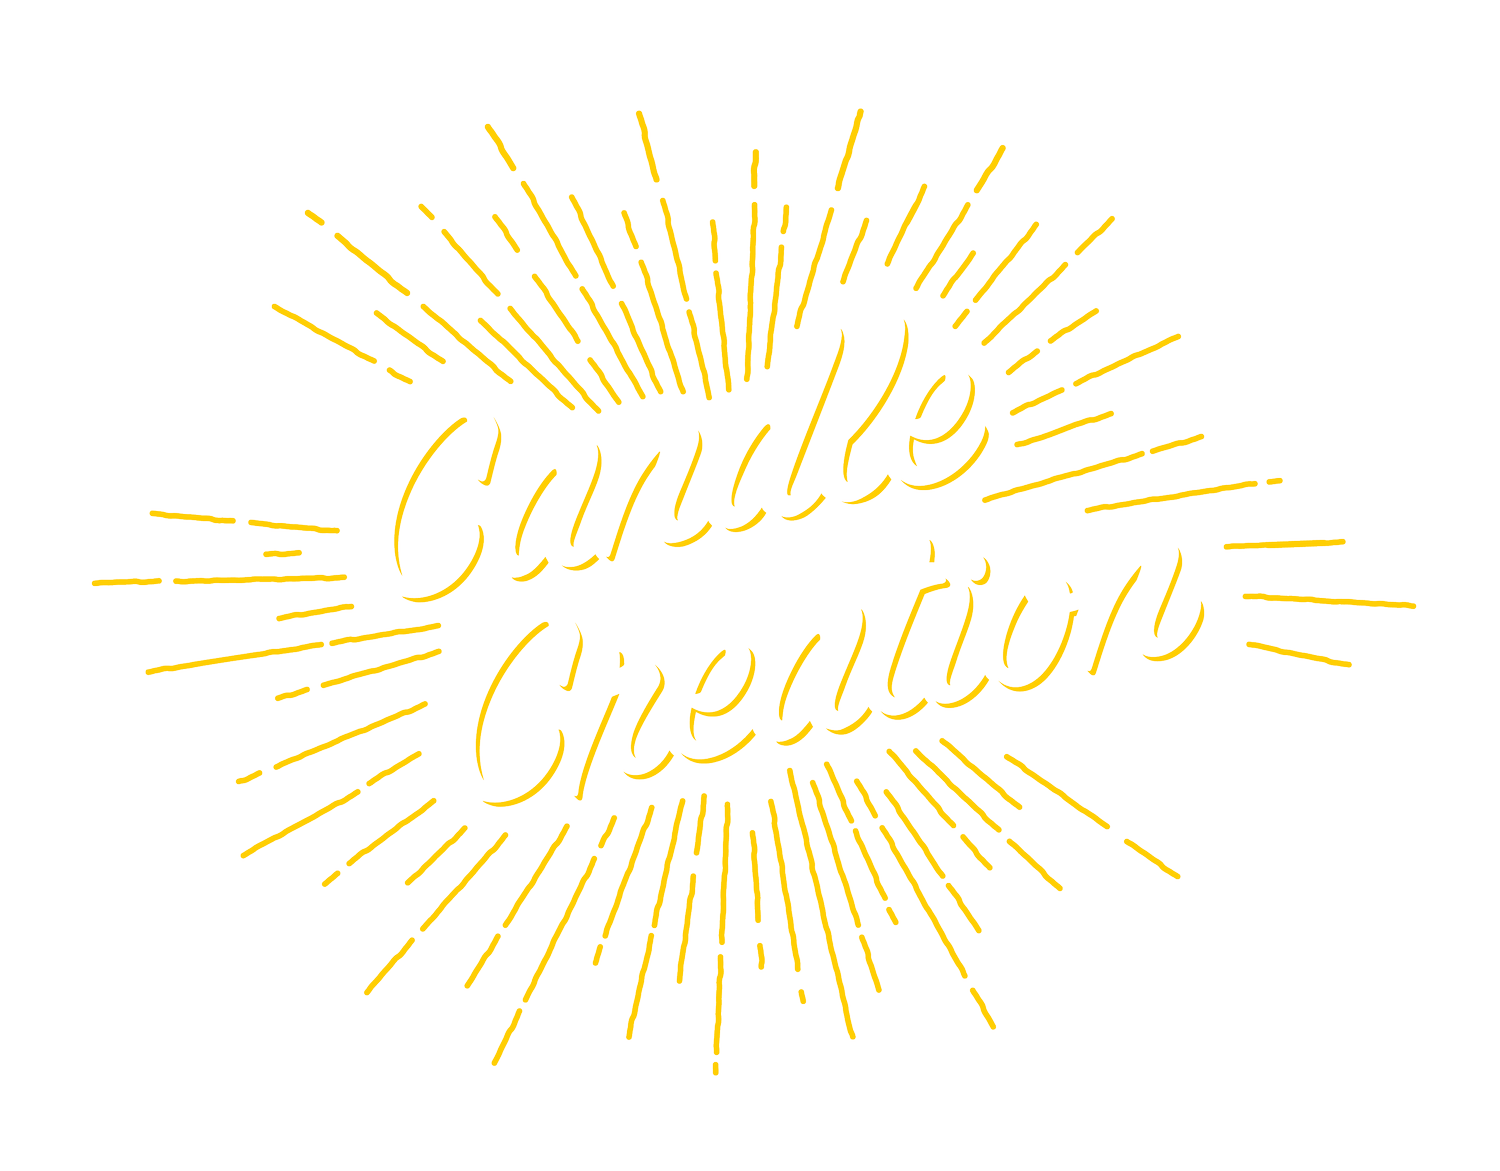 The Candle Creation Bar